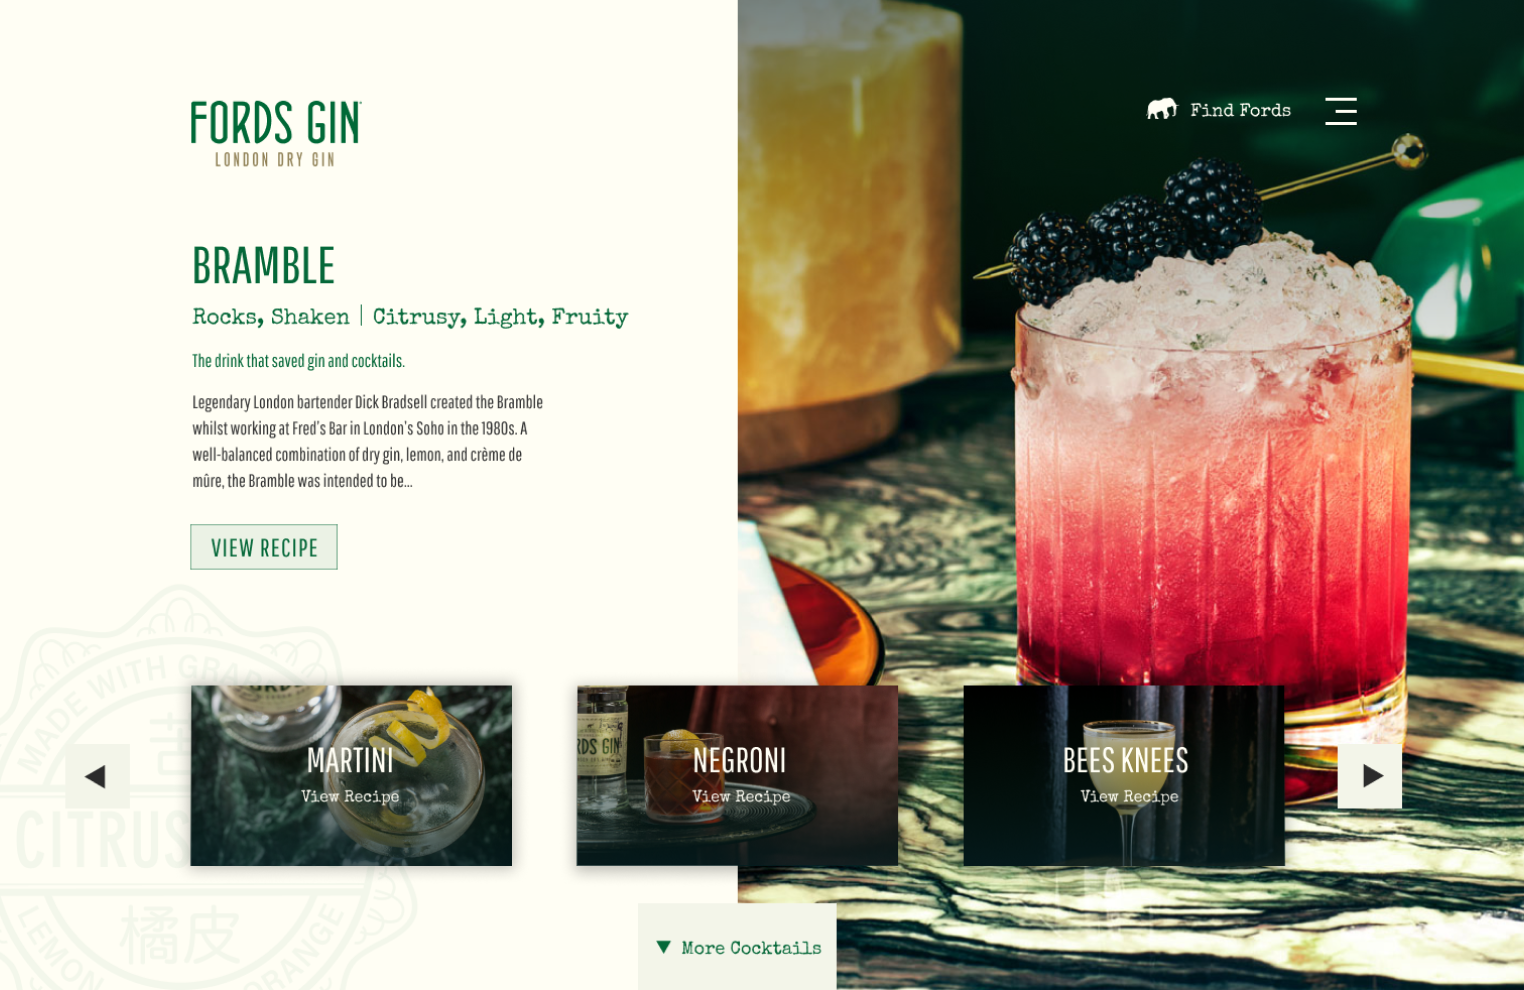 Fords Gin web design featuring a cocktail called 'Bramble' accompanied with a description and the option to view more cocktails.